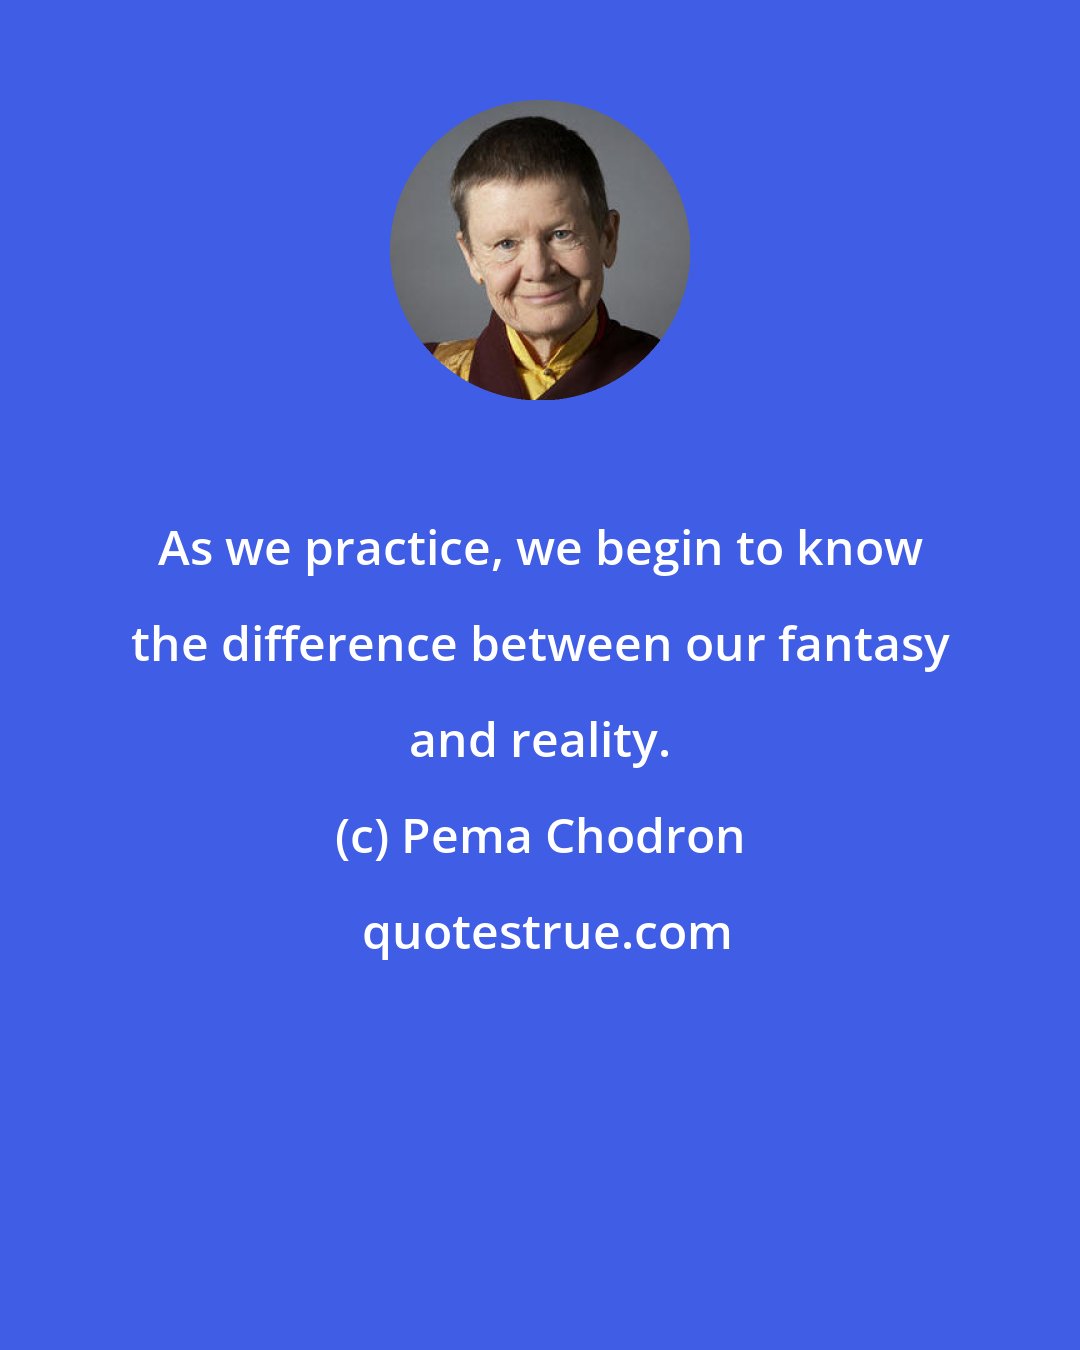 Pema Chodron: As we practice, we begin to know the difference between our fantasy and reality.